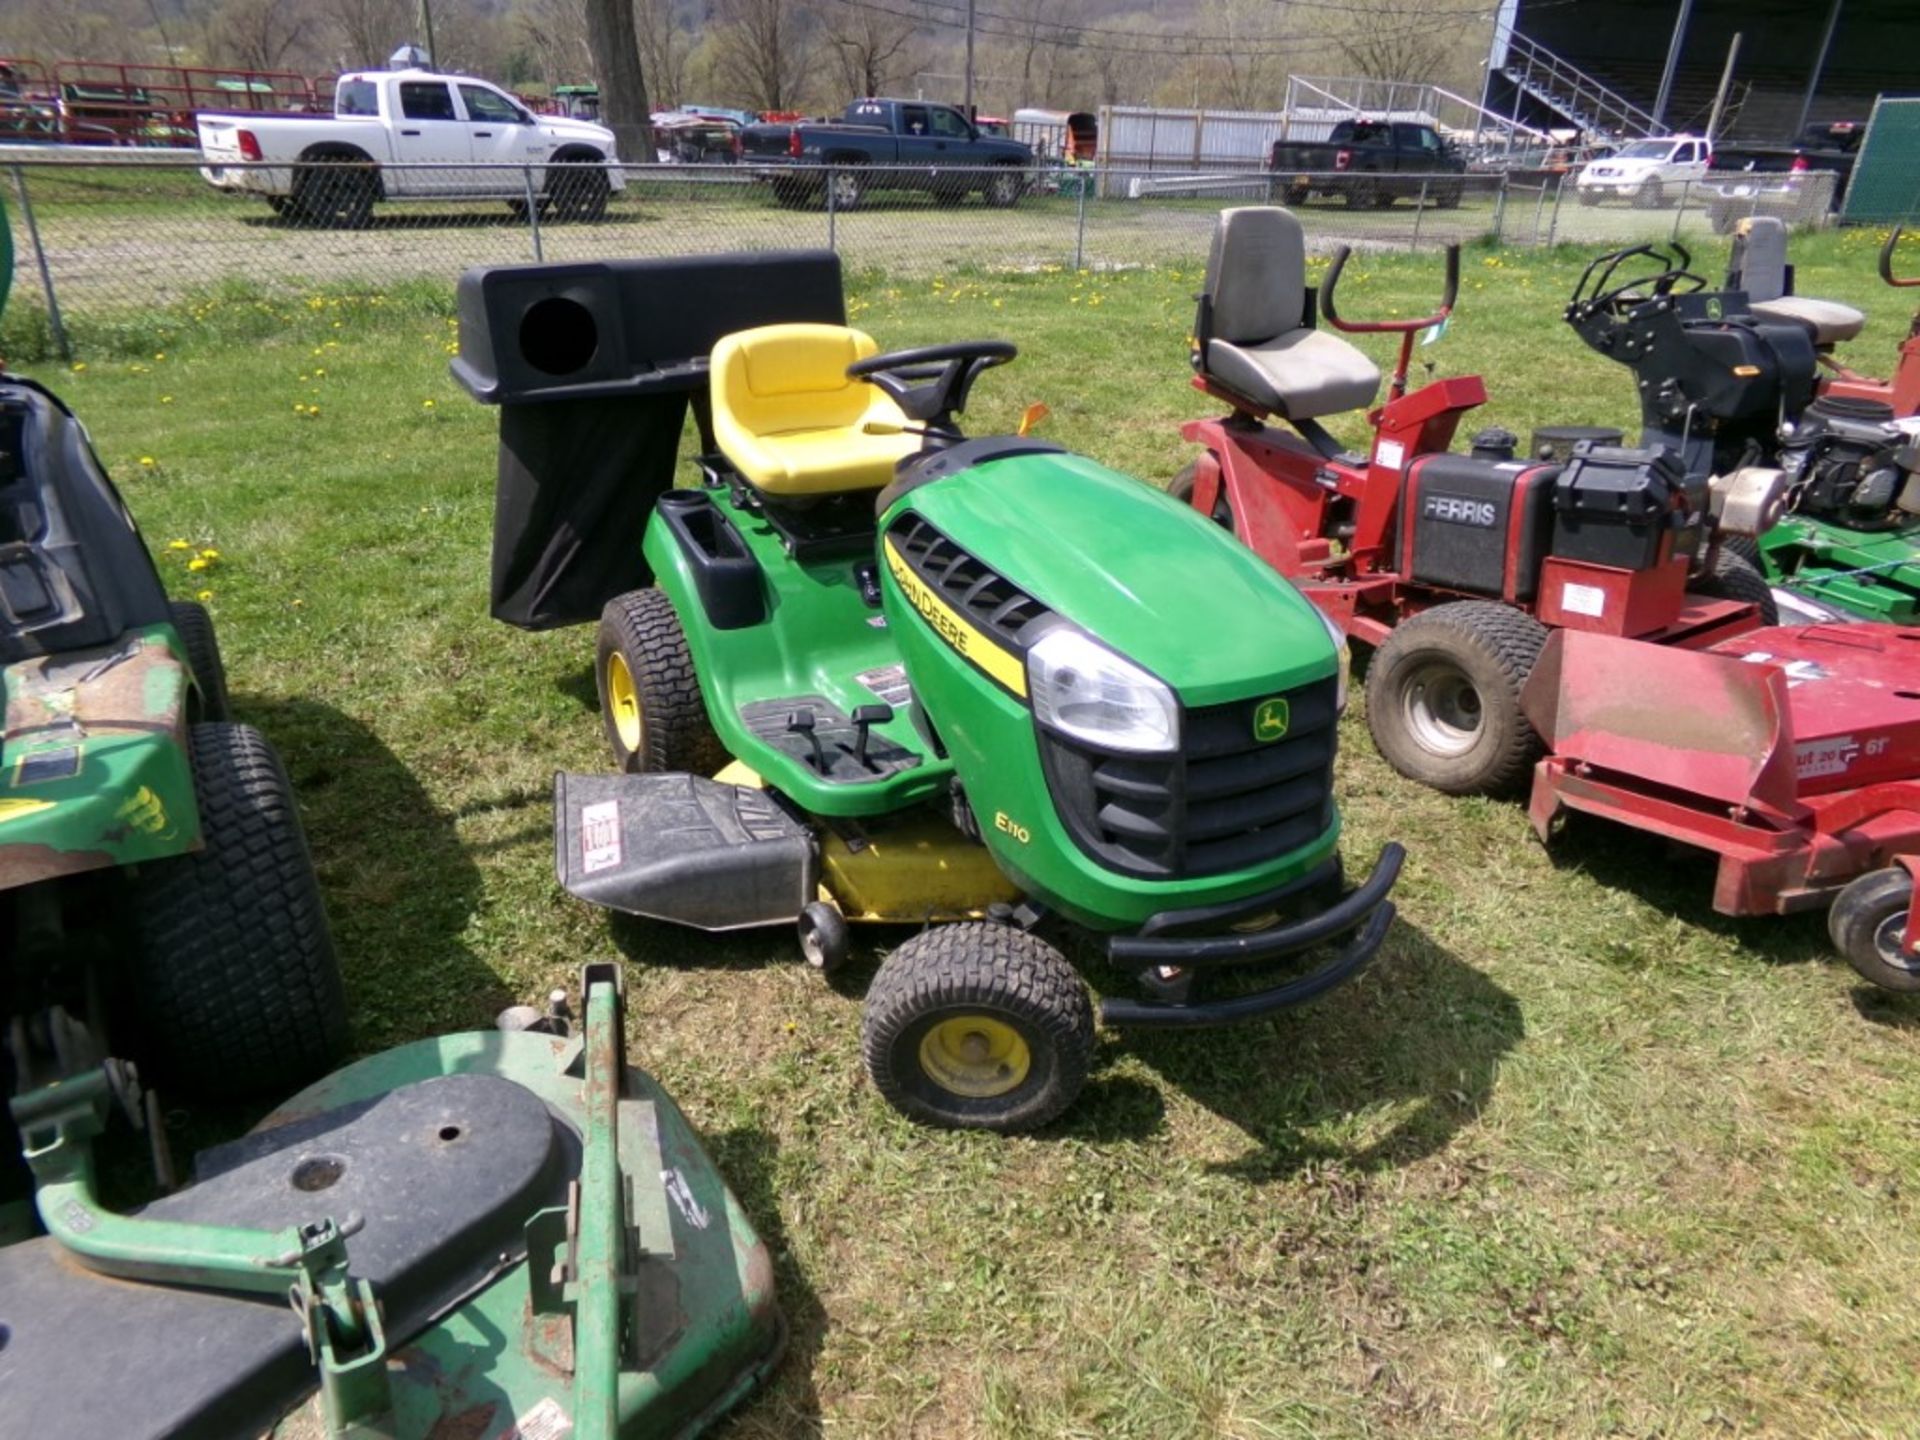 JD E110 Mower w/42'' Deck, 19 HP Briggs & Stratton Engine, w/JD Bagger System, 125 Hrs, Ser # 028202 - Image 2 of 3